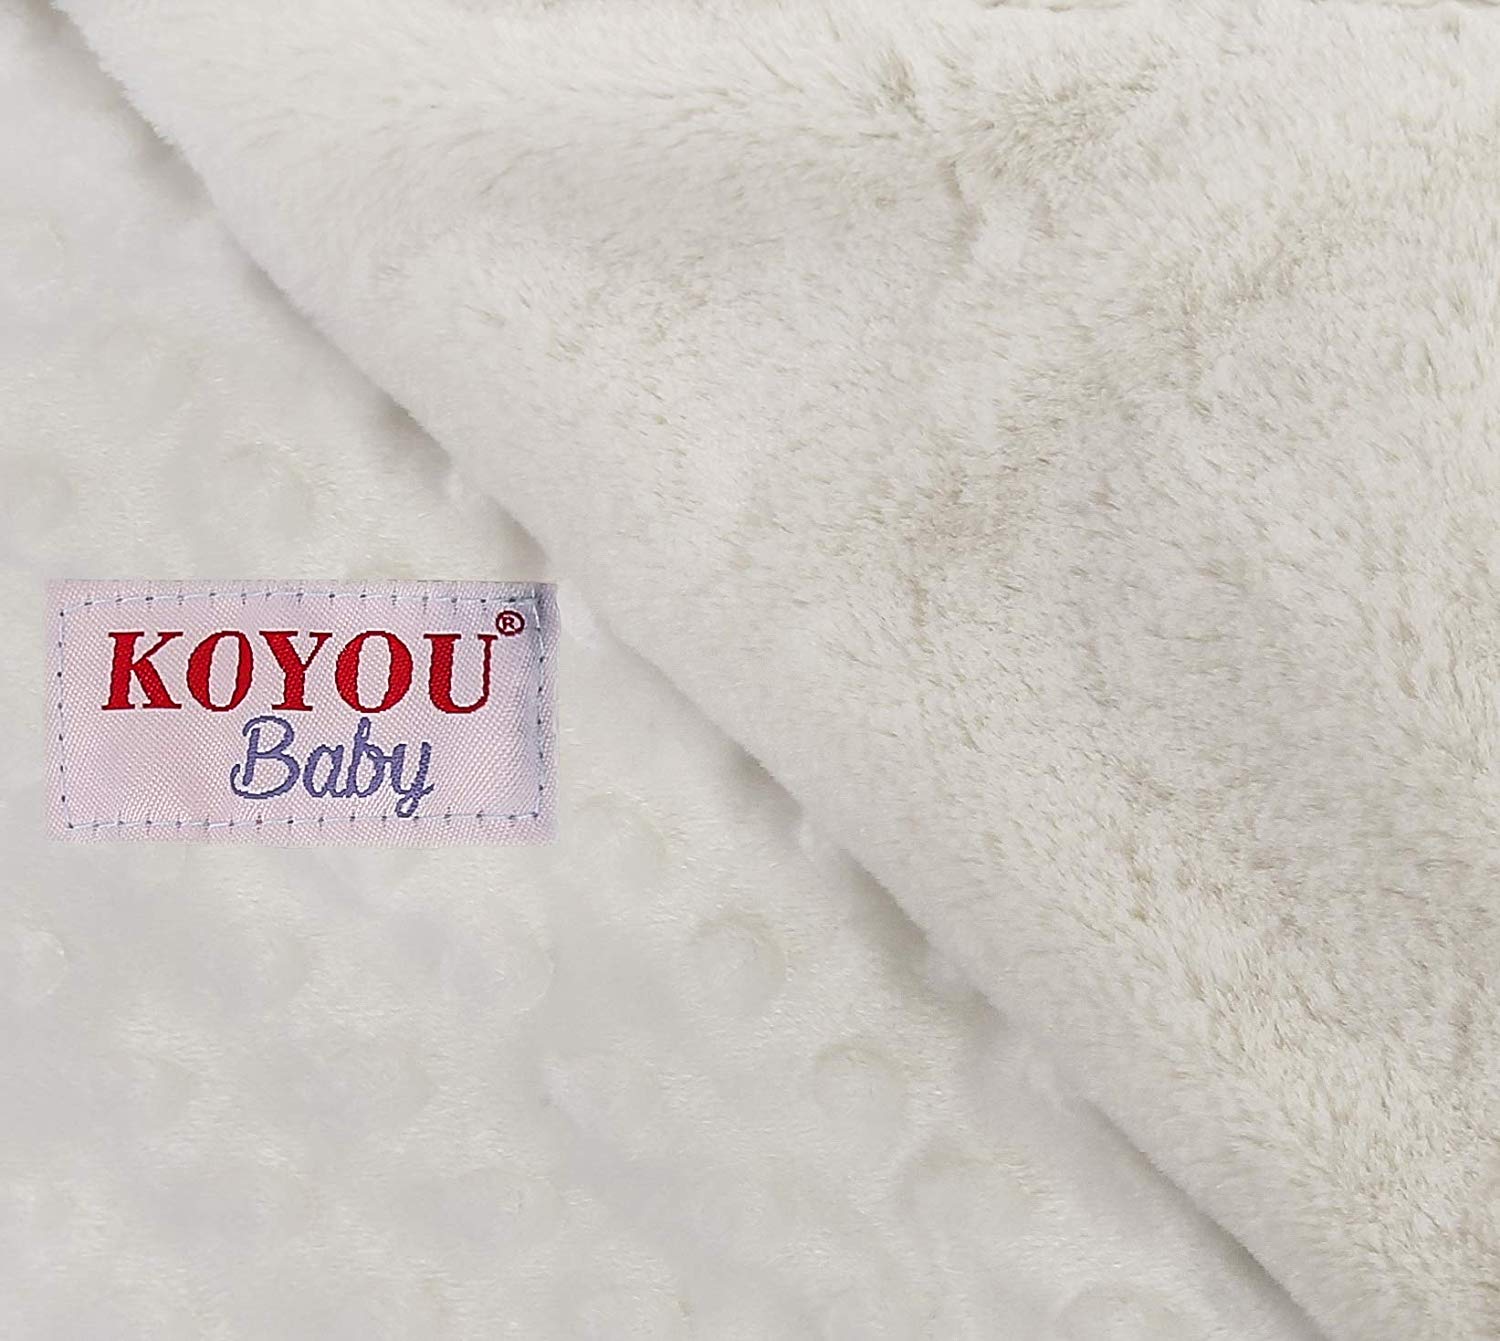 KOYOU BABY - Soft Plush Mink Baby Blanket with Dotted Backing and Silky Trim (30 x 35) - image 3 of 3